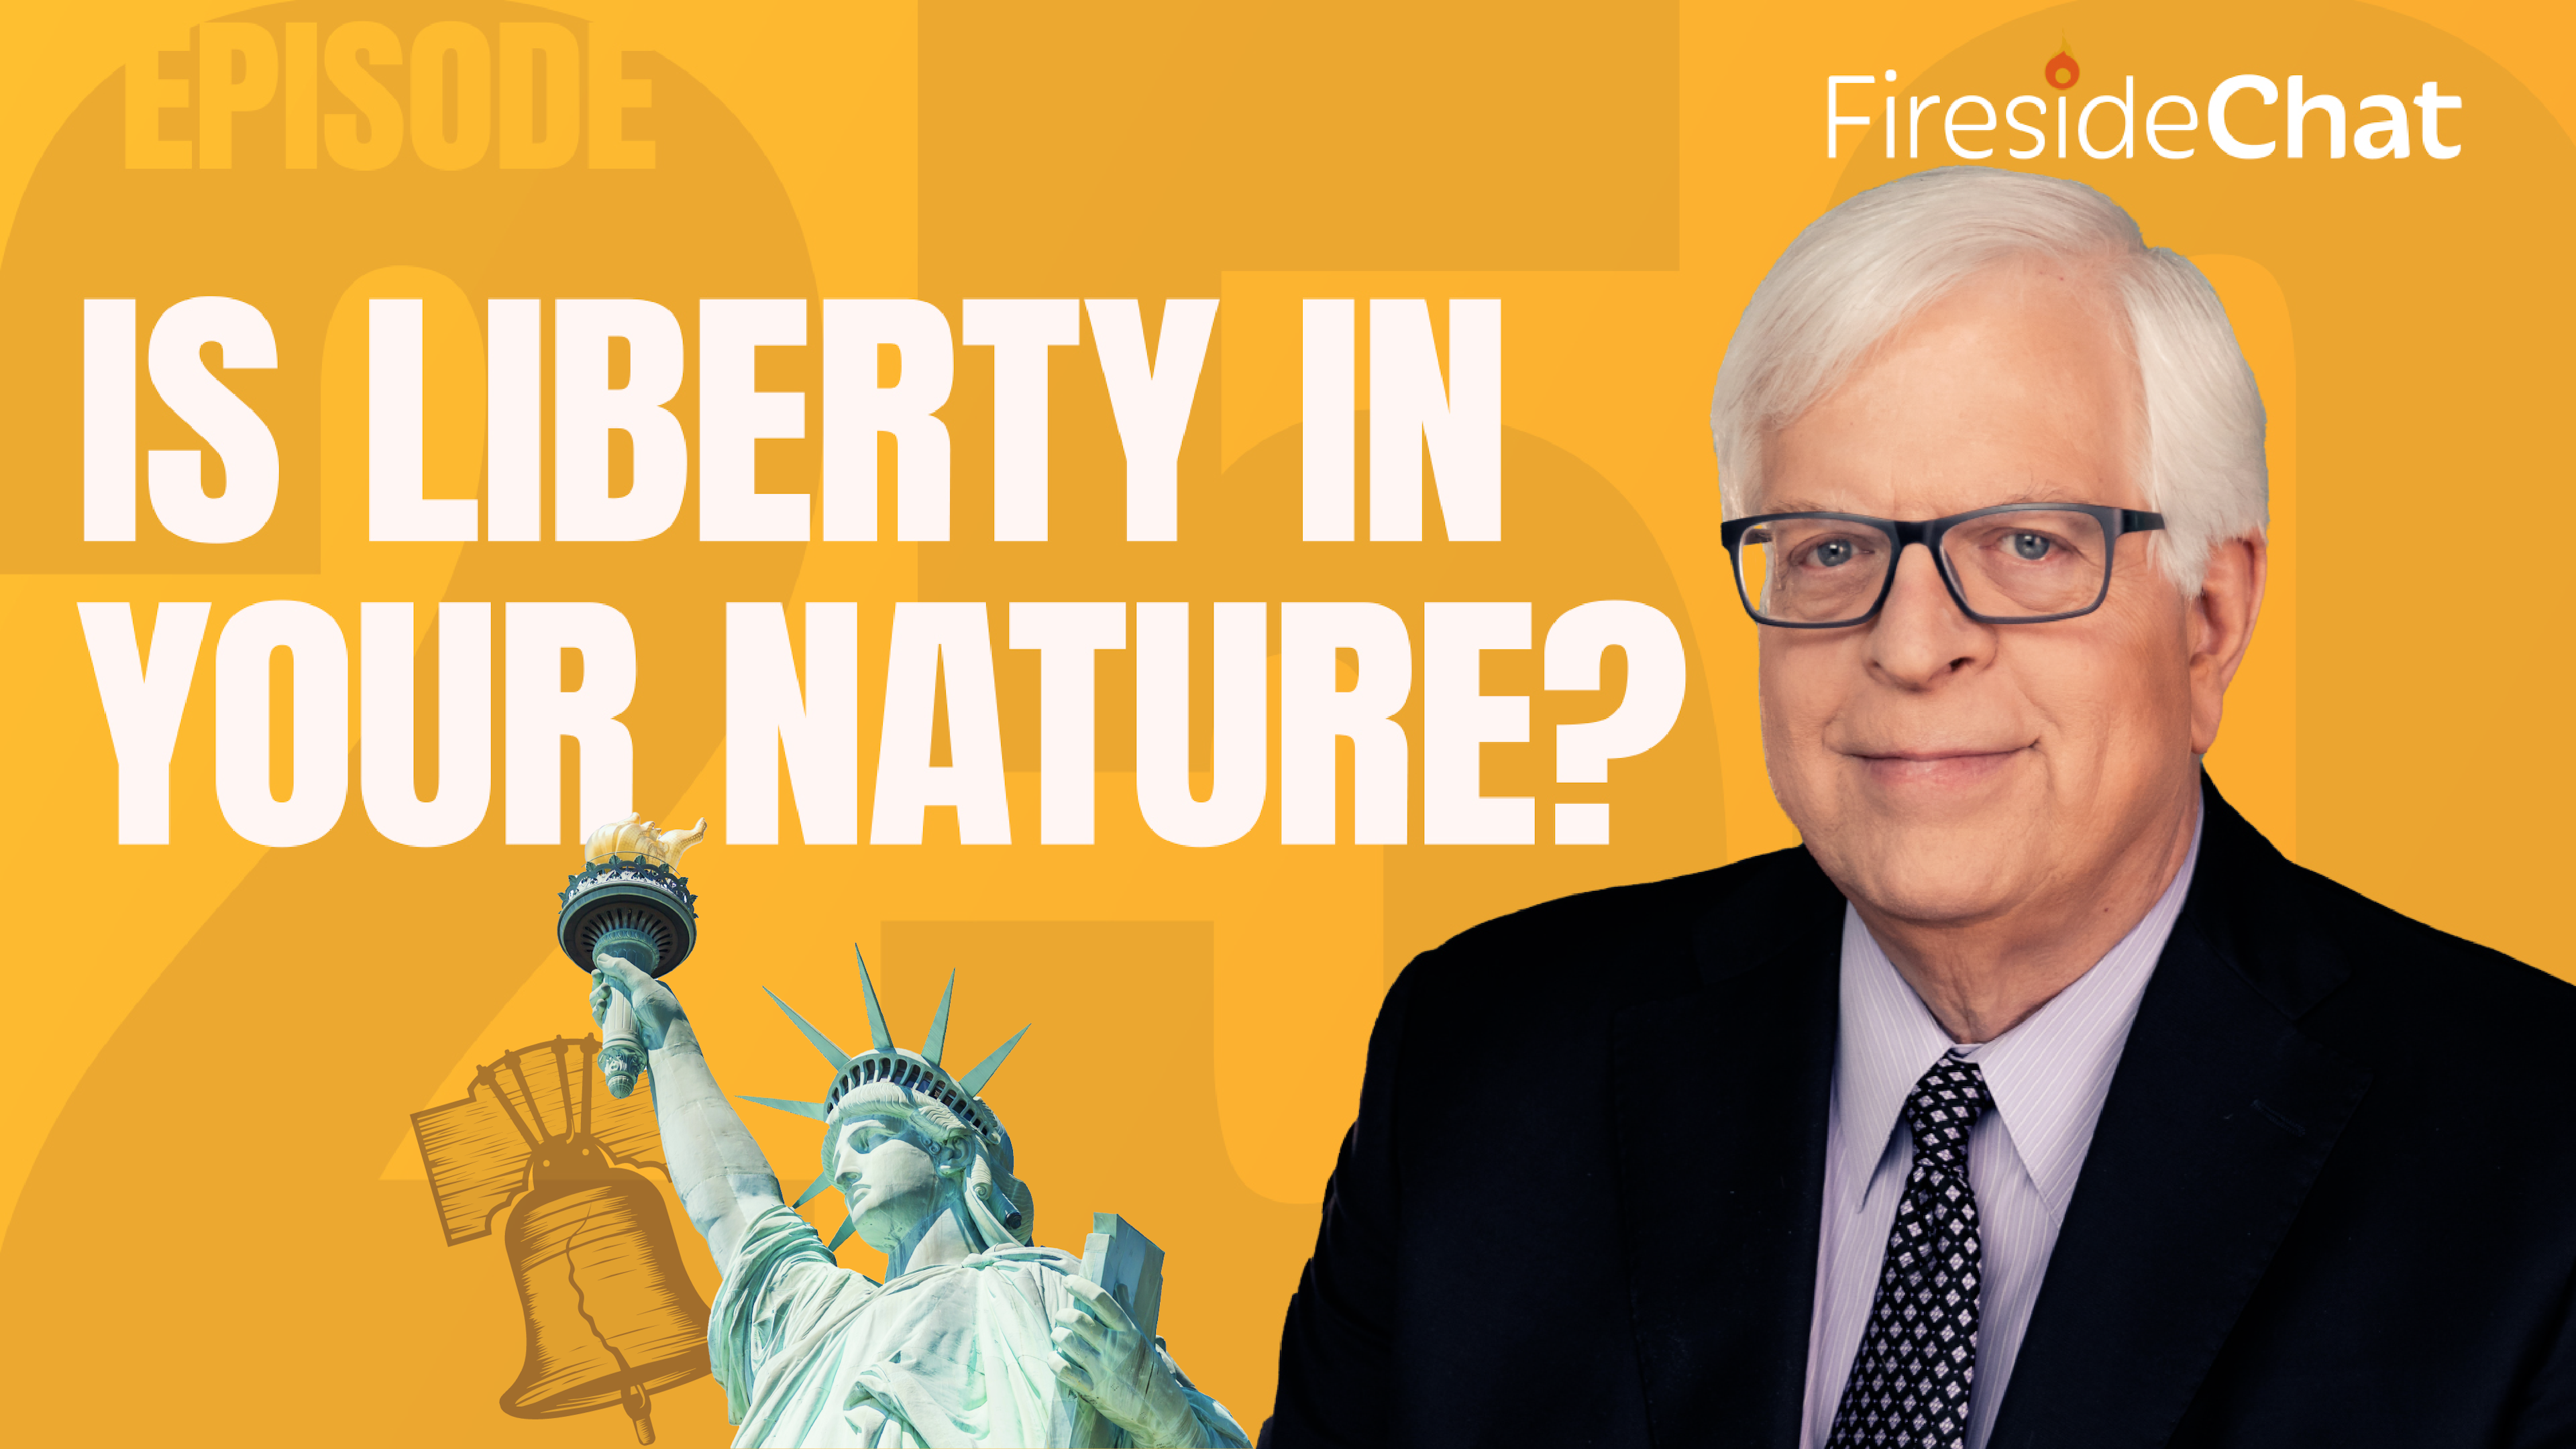 Ep. 250 — Is Liberty in Your Nature?